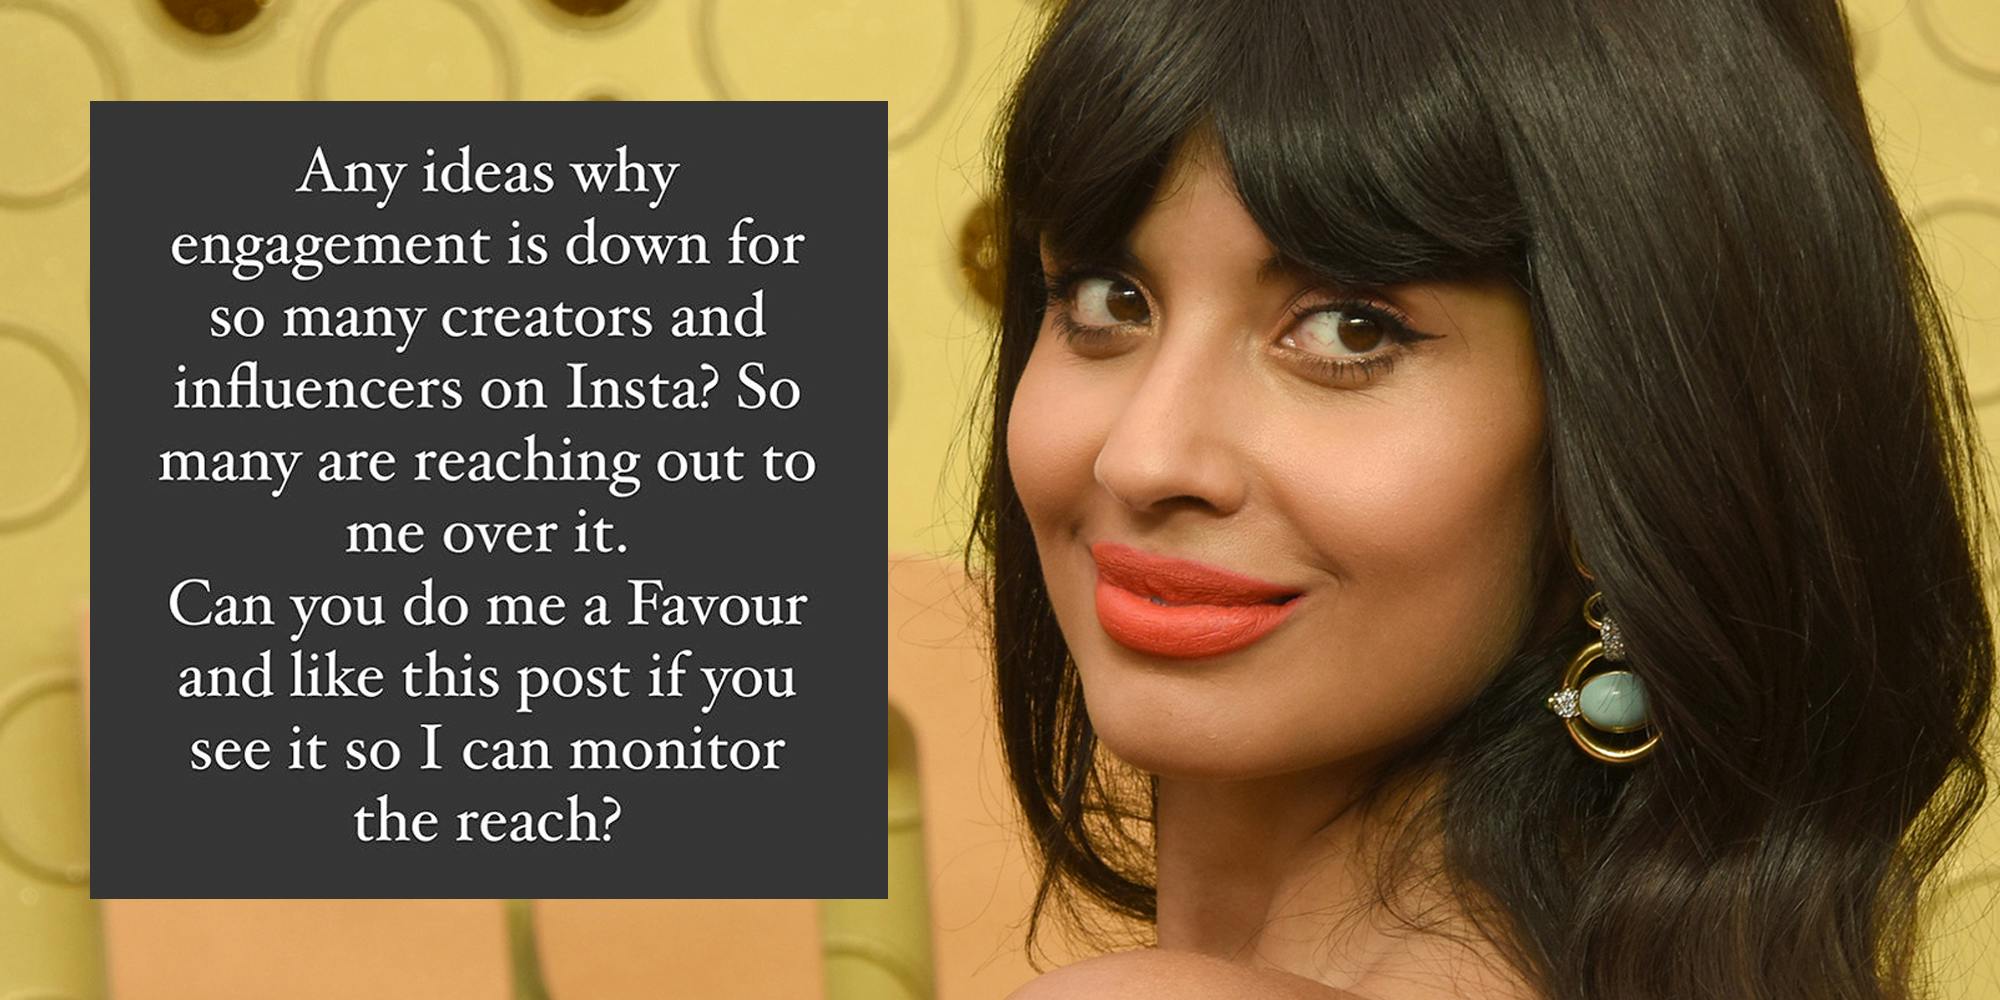 Jameela Jamil with "Any ideas why engagement is down for so many creators and influencers on Insta? So many are reaching out to me over it. Can you do me a Favour and like this post if you see it so I can monitor the reach?" post